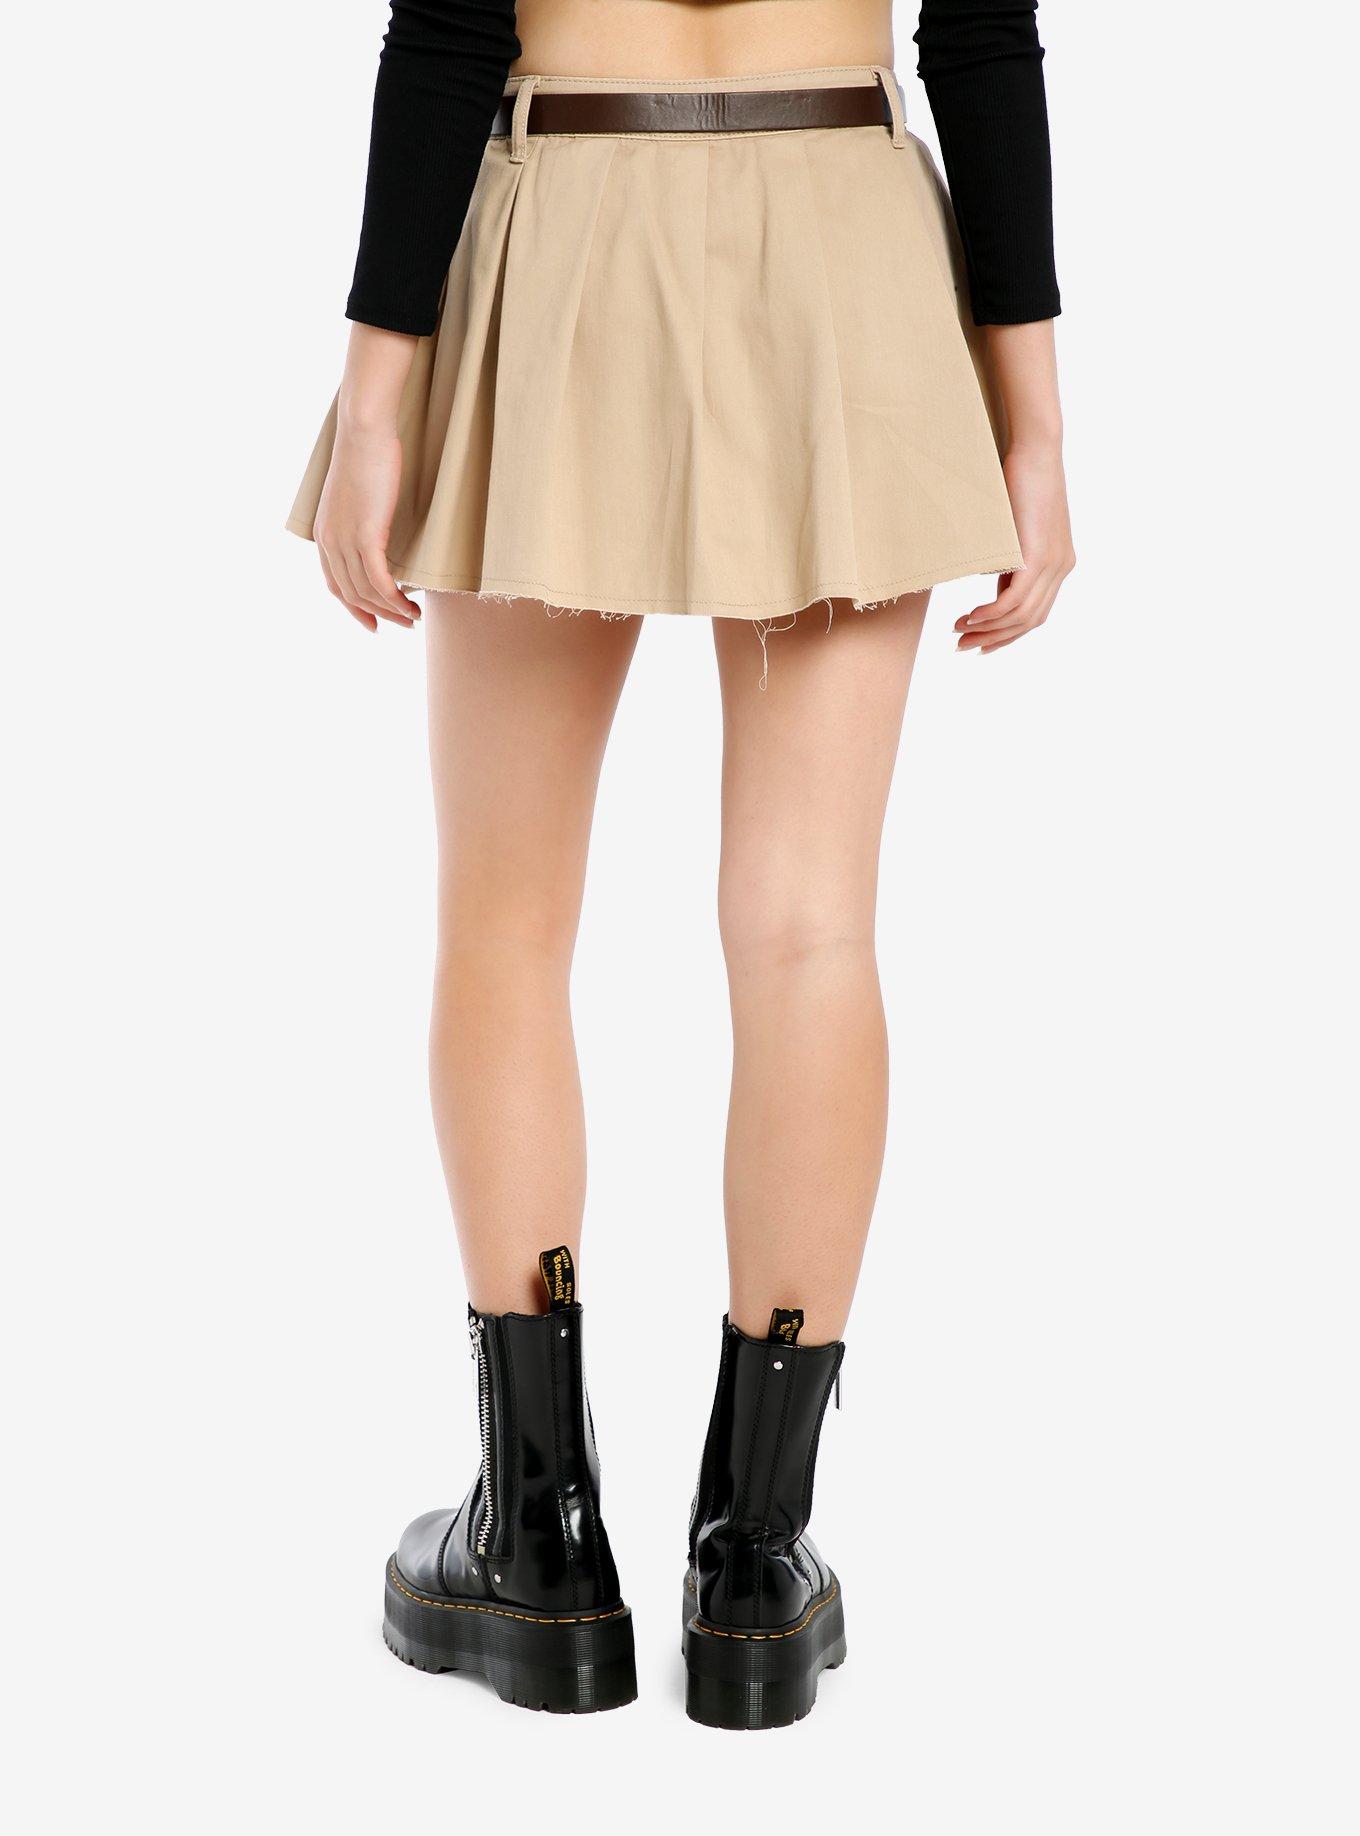 Social Collision Khaki Belted Low-Rise Pleated Mini Skirt, BROWN, alternate